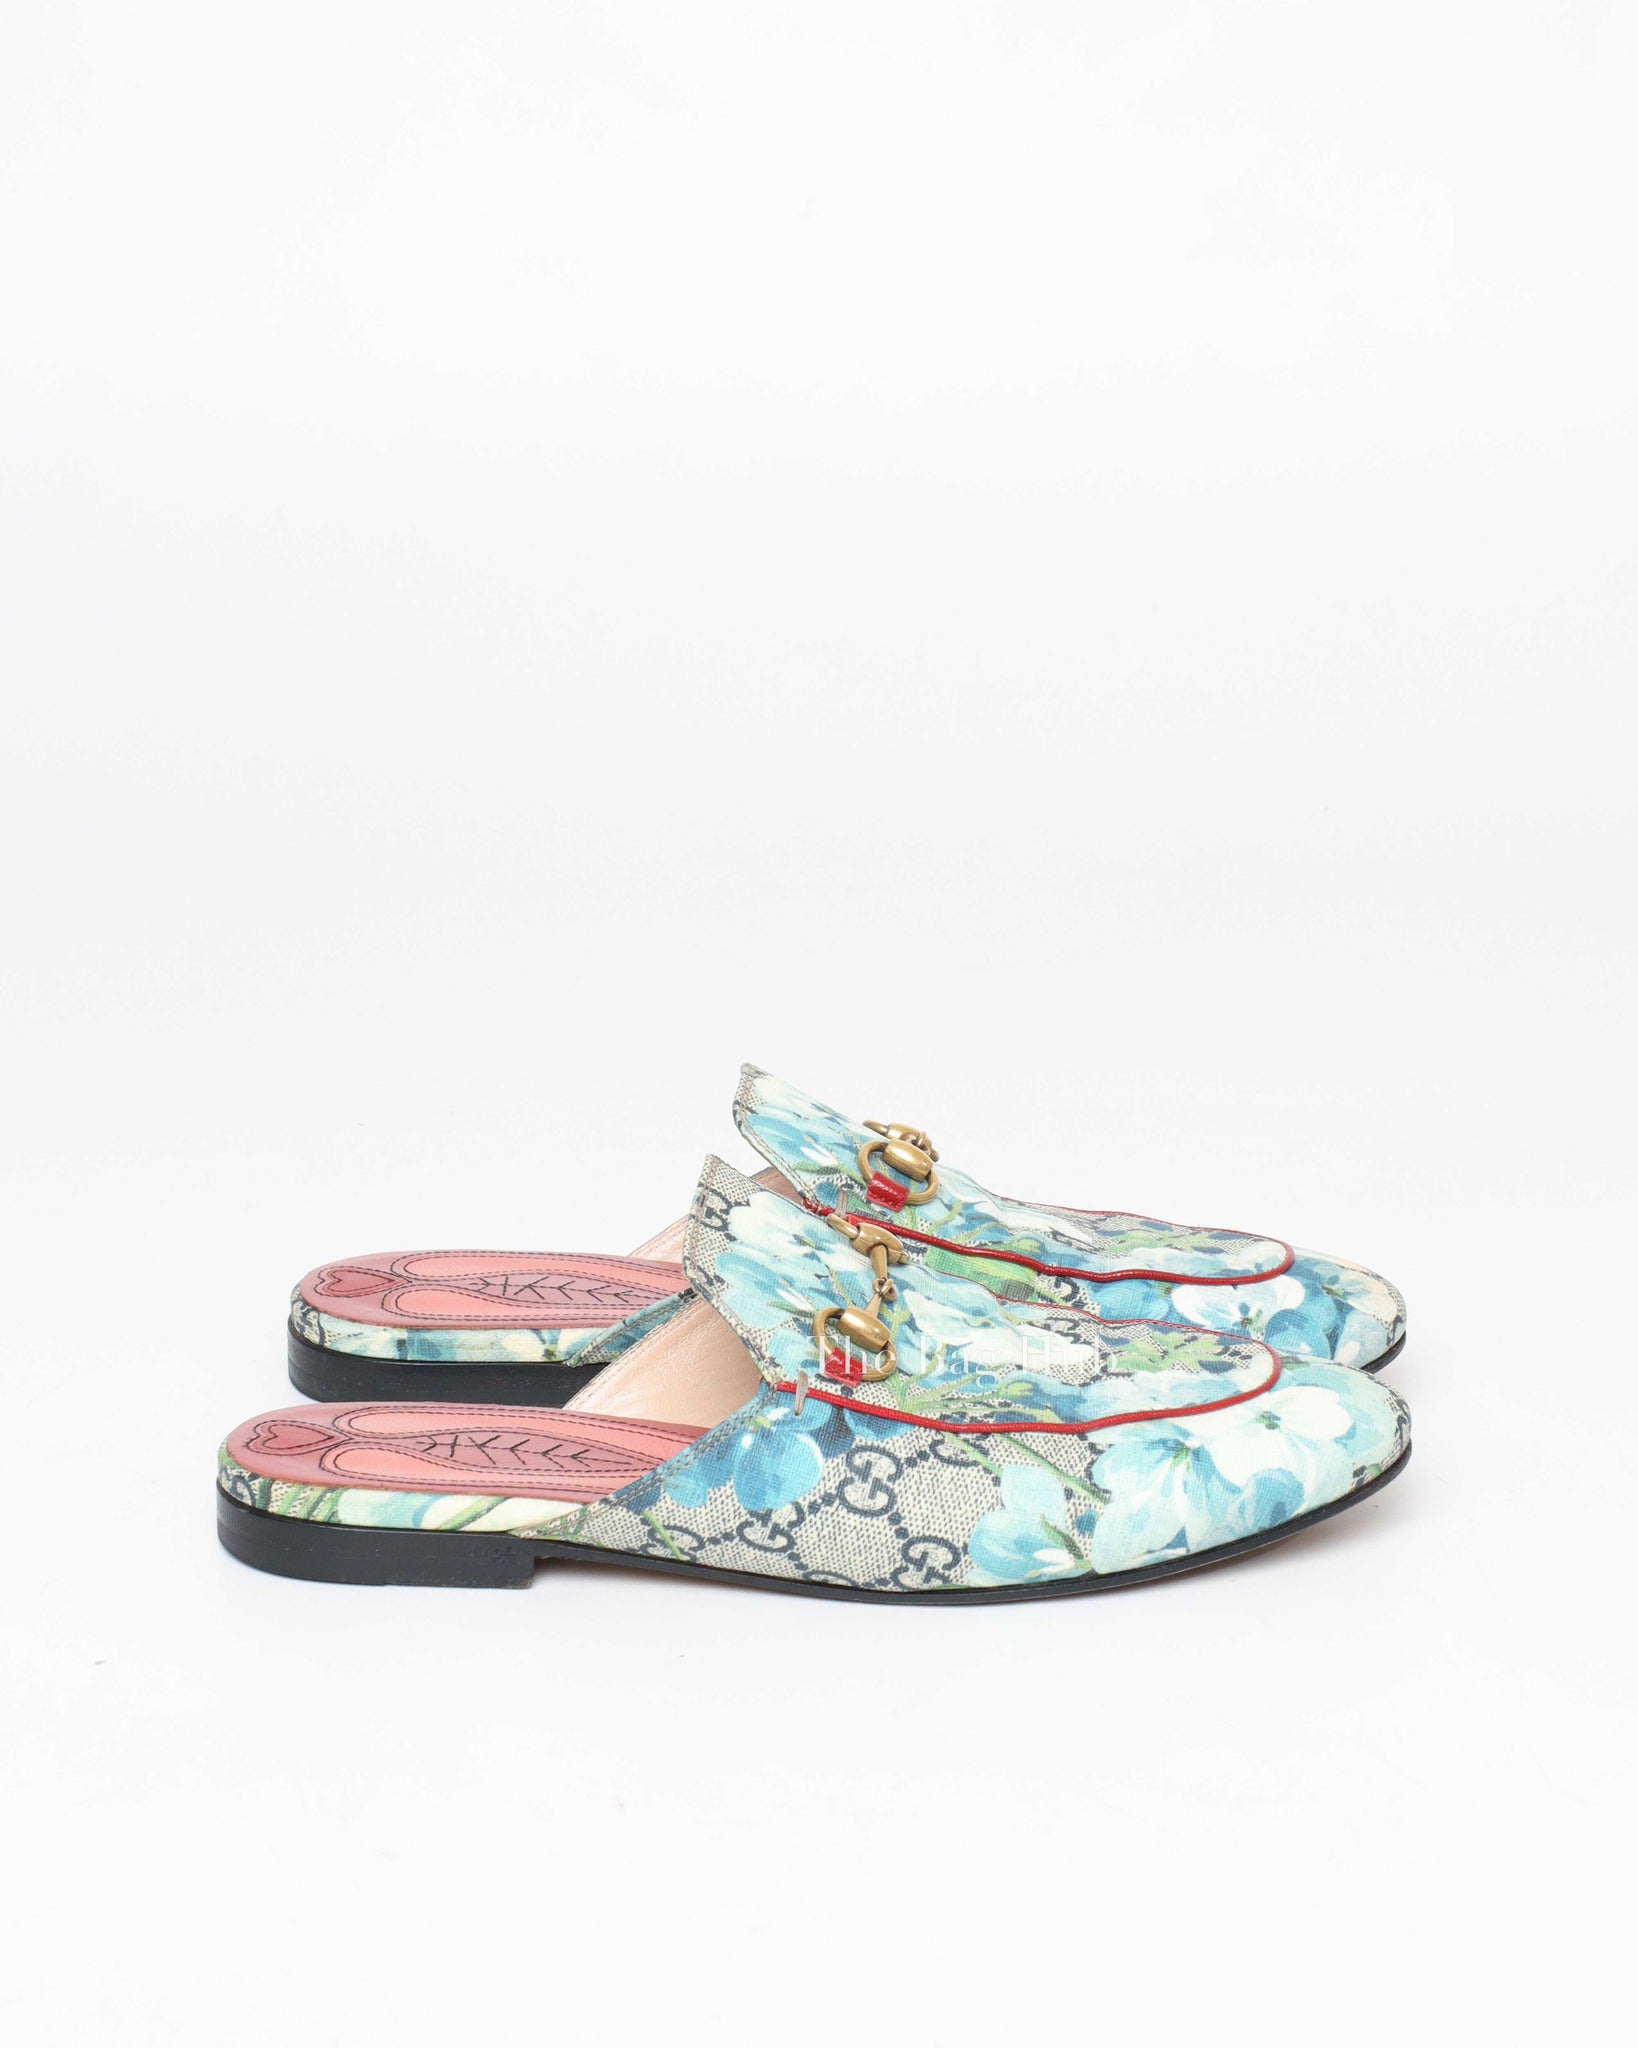 Gucci Blue Blooms Mules Size 36.5-5